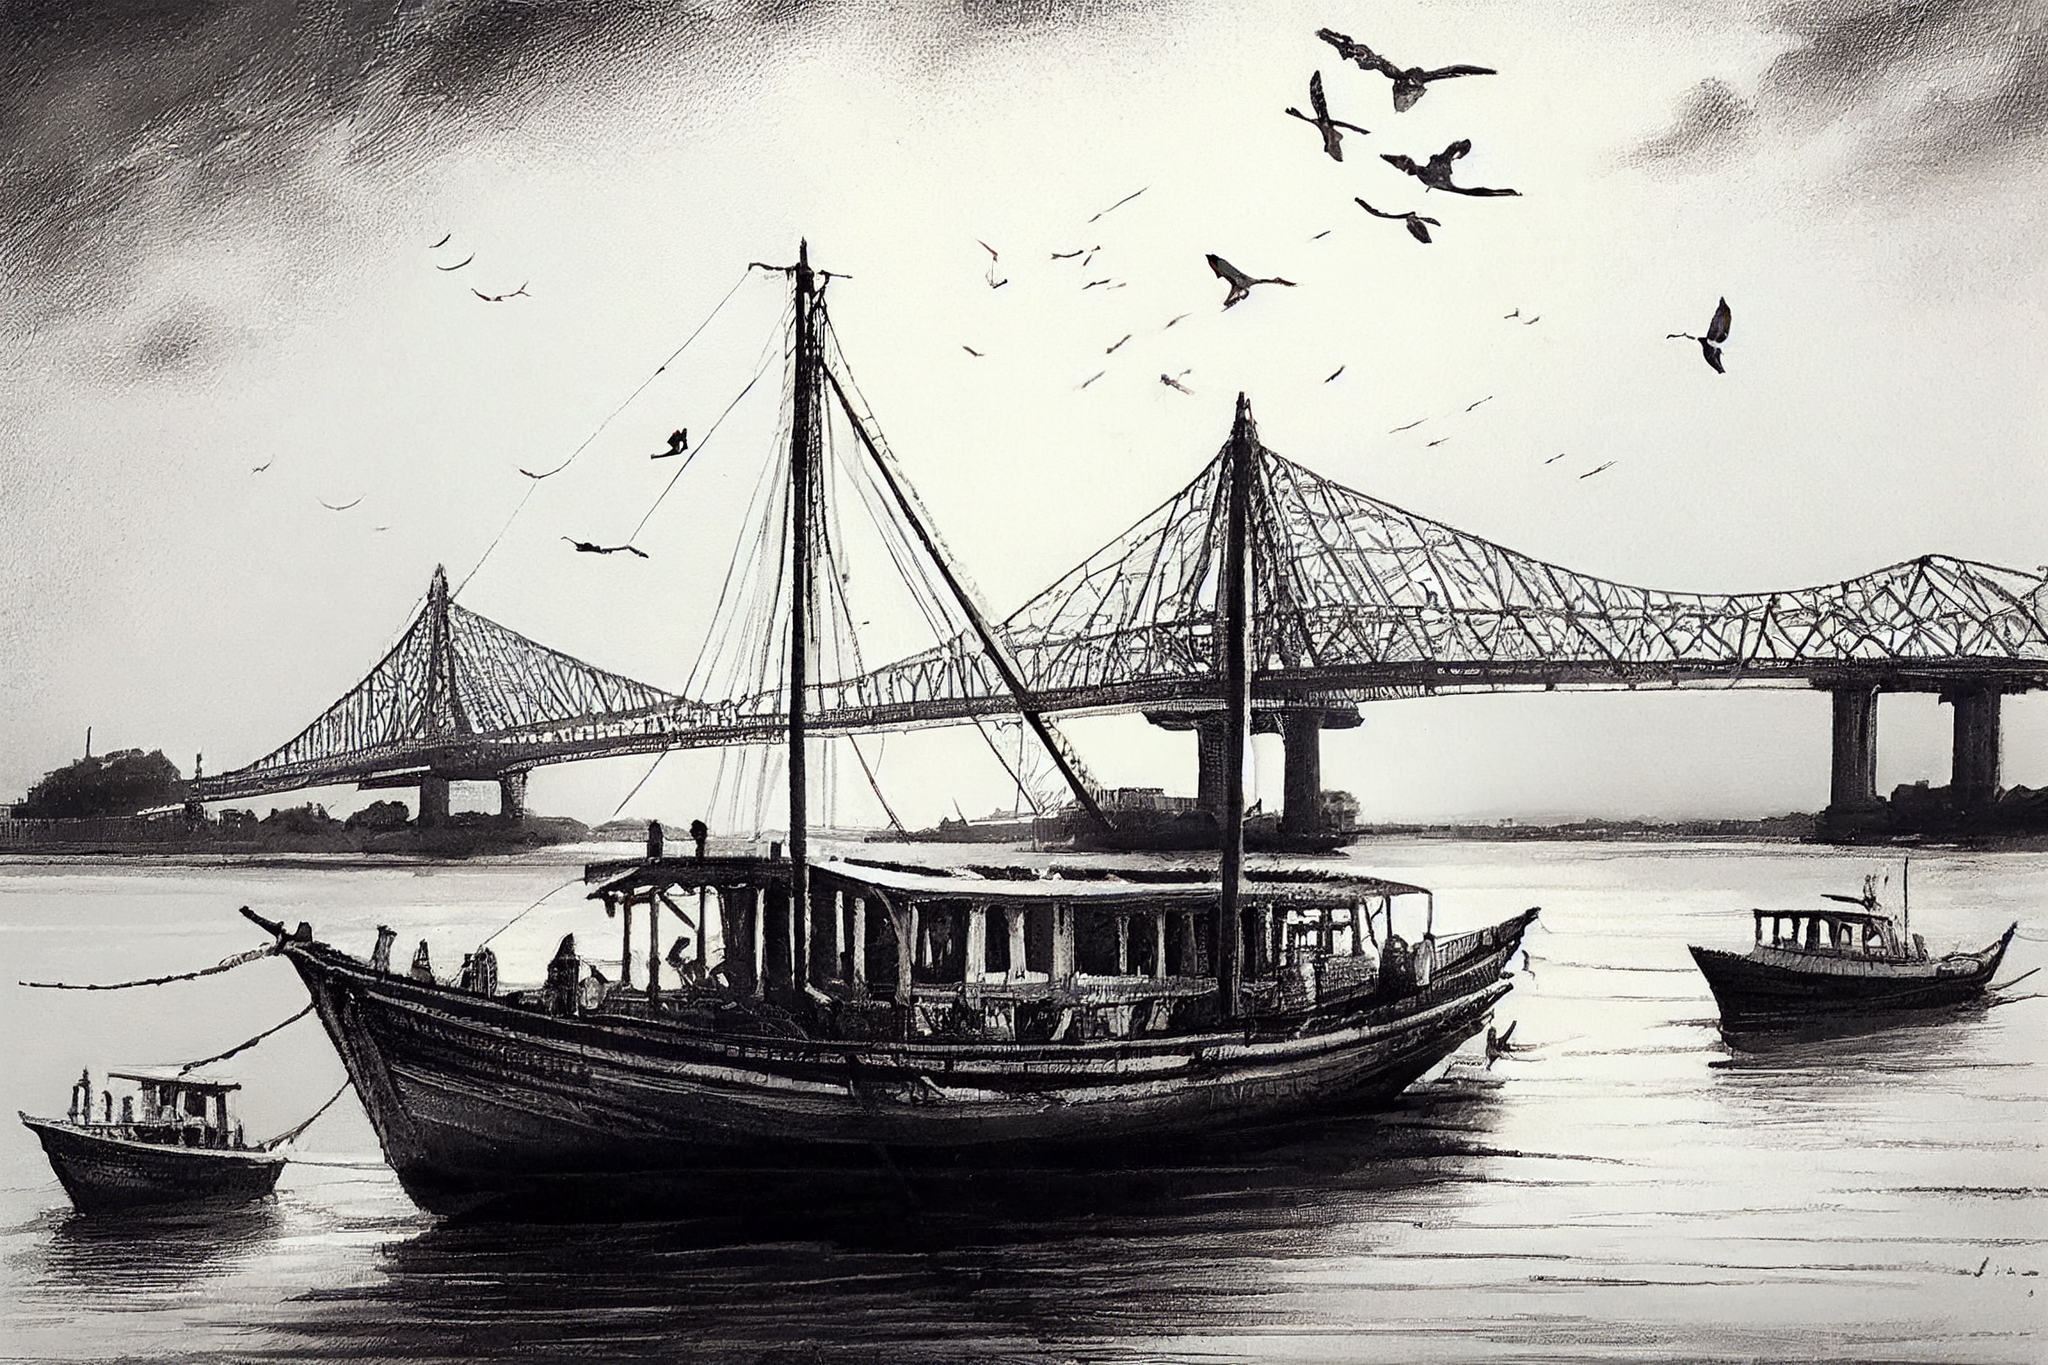 Capturing Kolkata's Iconic Howrah Bridge: A Pencil Sketch of Boats, Clouds, and Birds in the Background